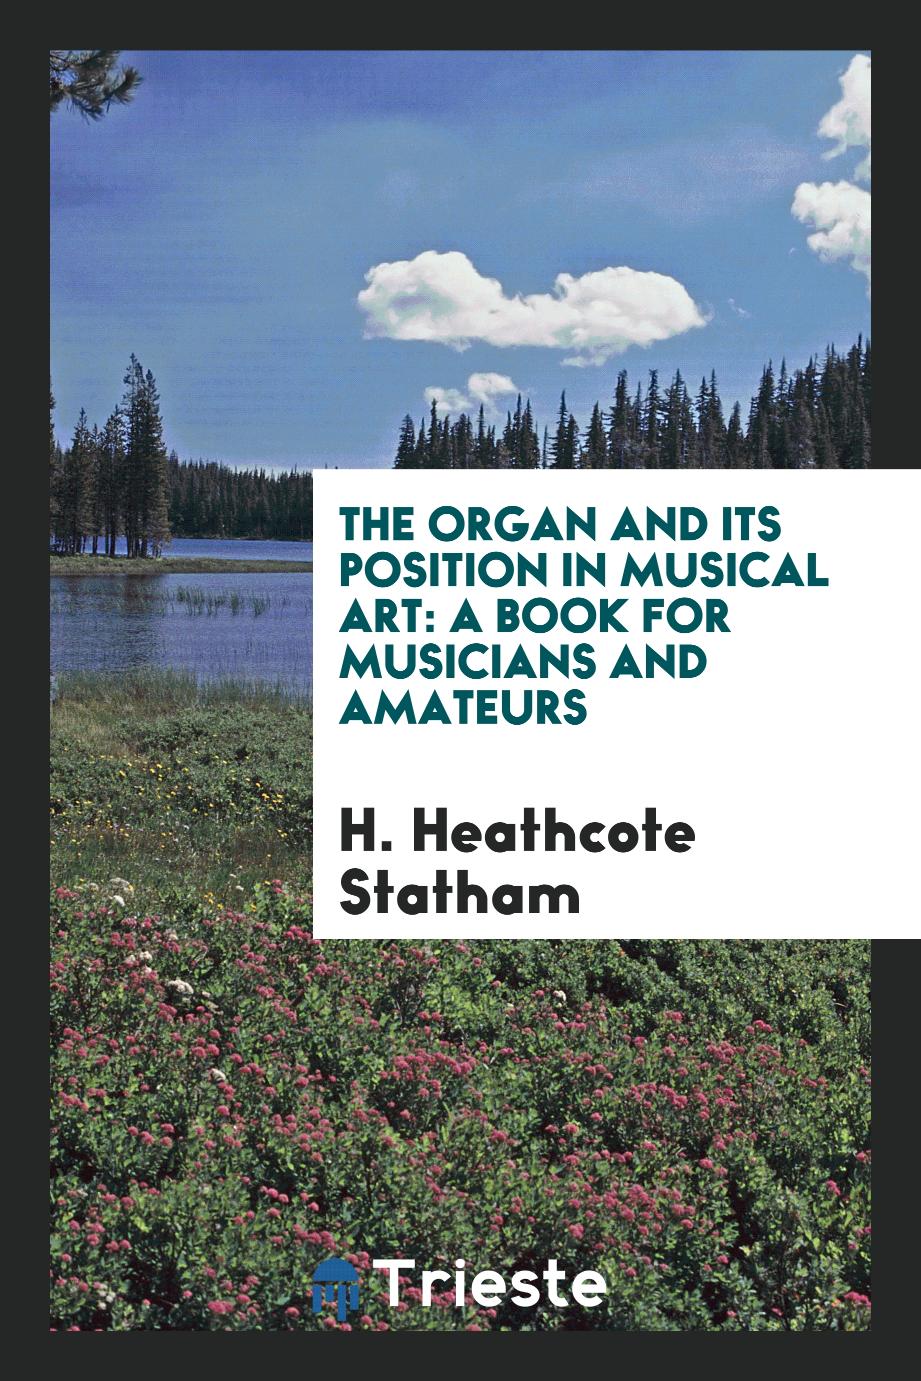 The Organ and Its Position in Musical Art: A Book for Musicians and Amateurs